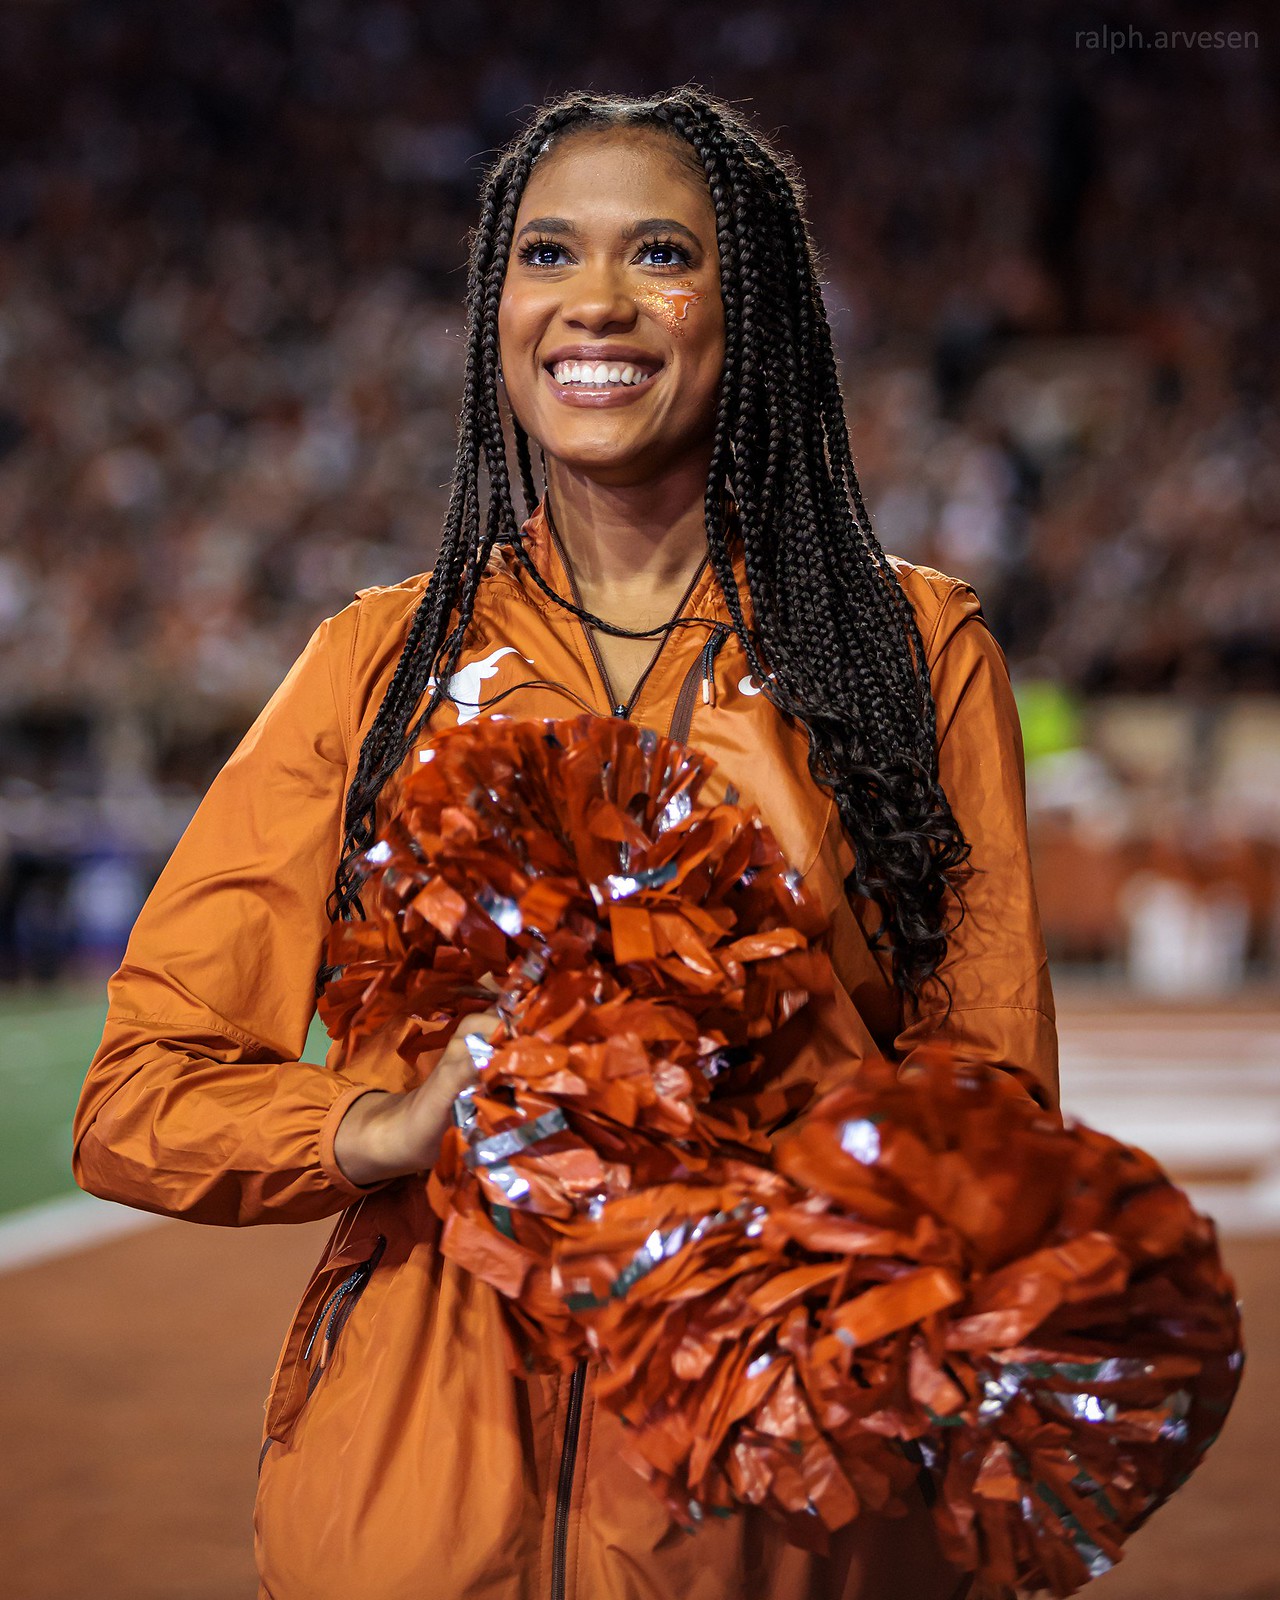 Texas Cheer and Pom | Texas Review | Ralph Arvesen